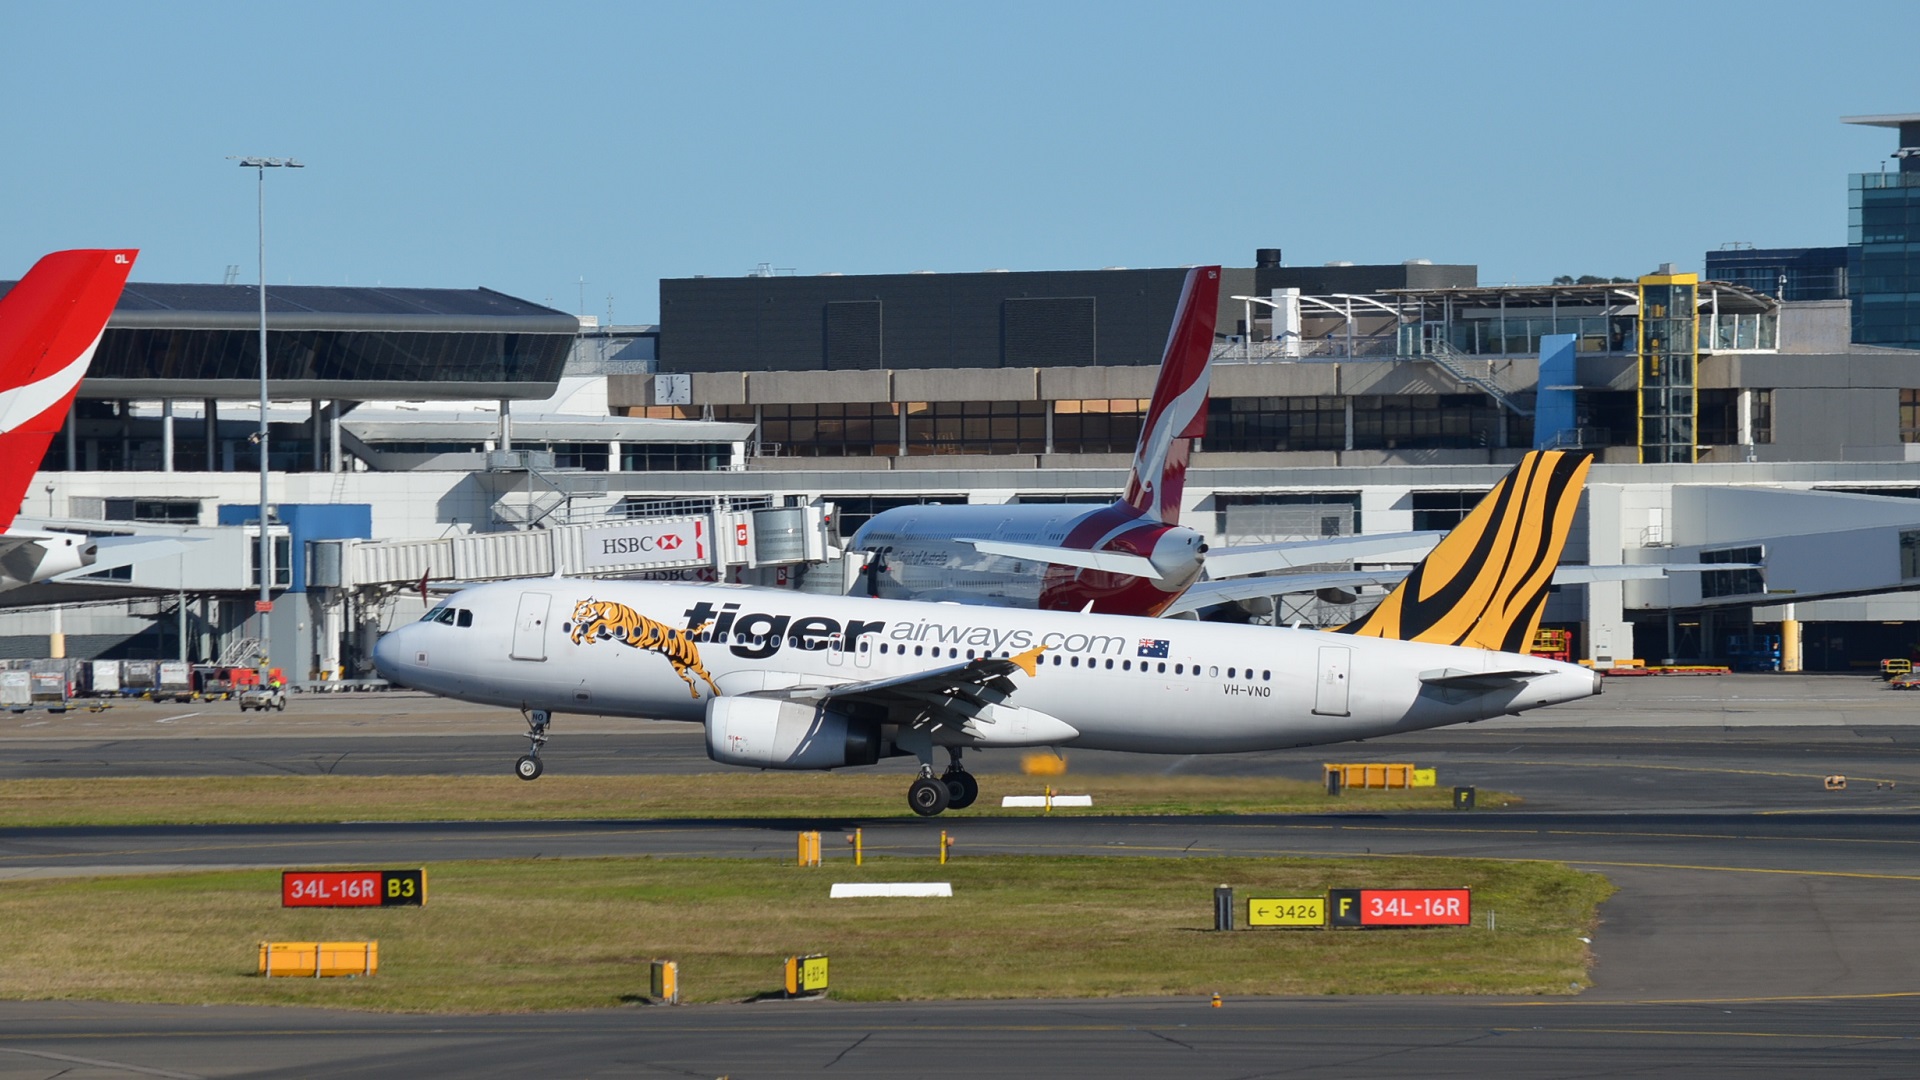 vehicles, airbus a320, airbus, aircraft, airplane, airport, photography, sydney, tiger airways